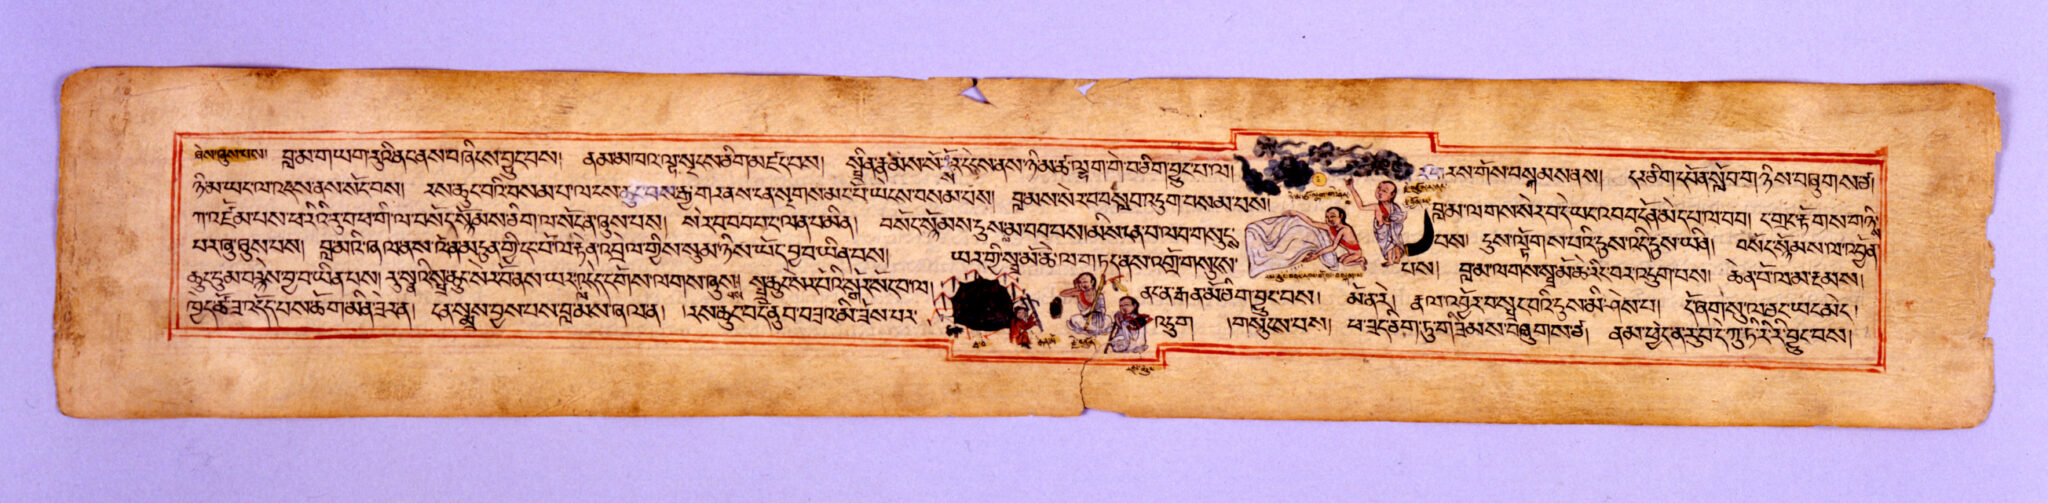 Tea-brown page with red border featuring Tibetan text and two color illuminations depicting scenes interspersed amongst text